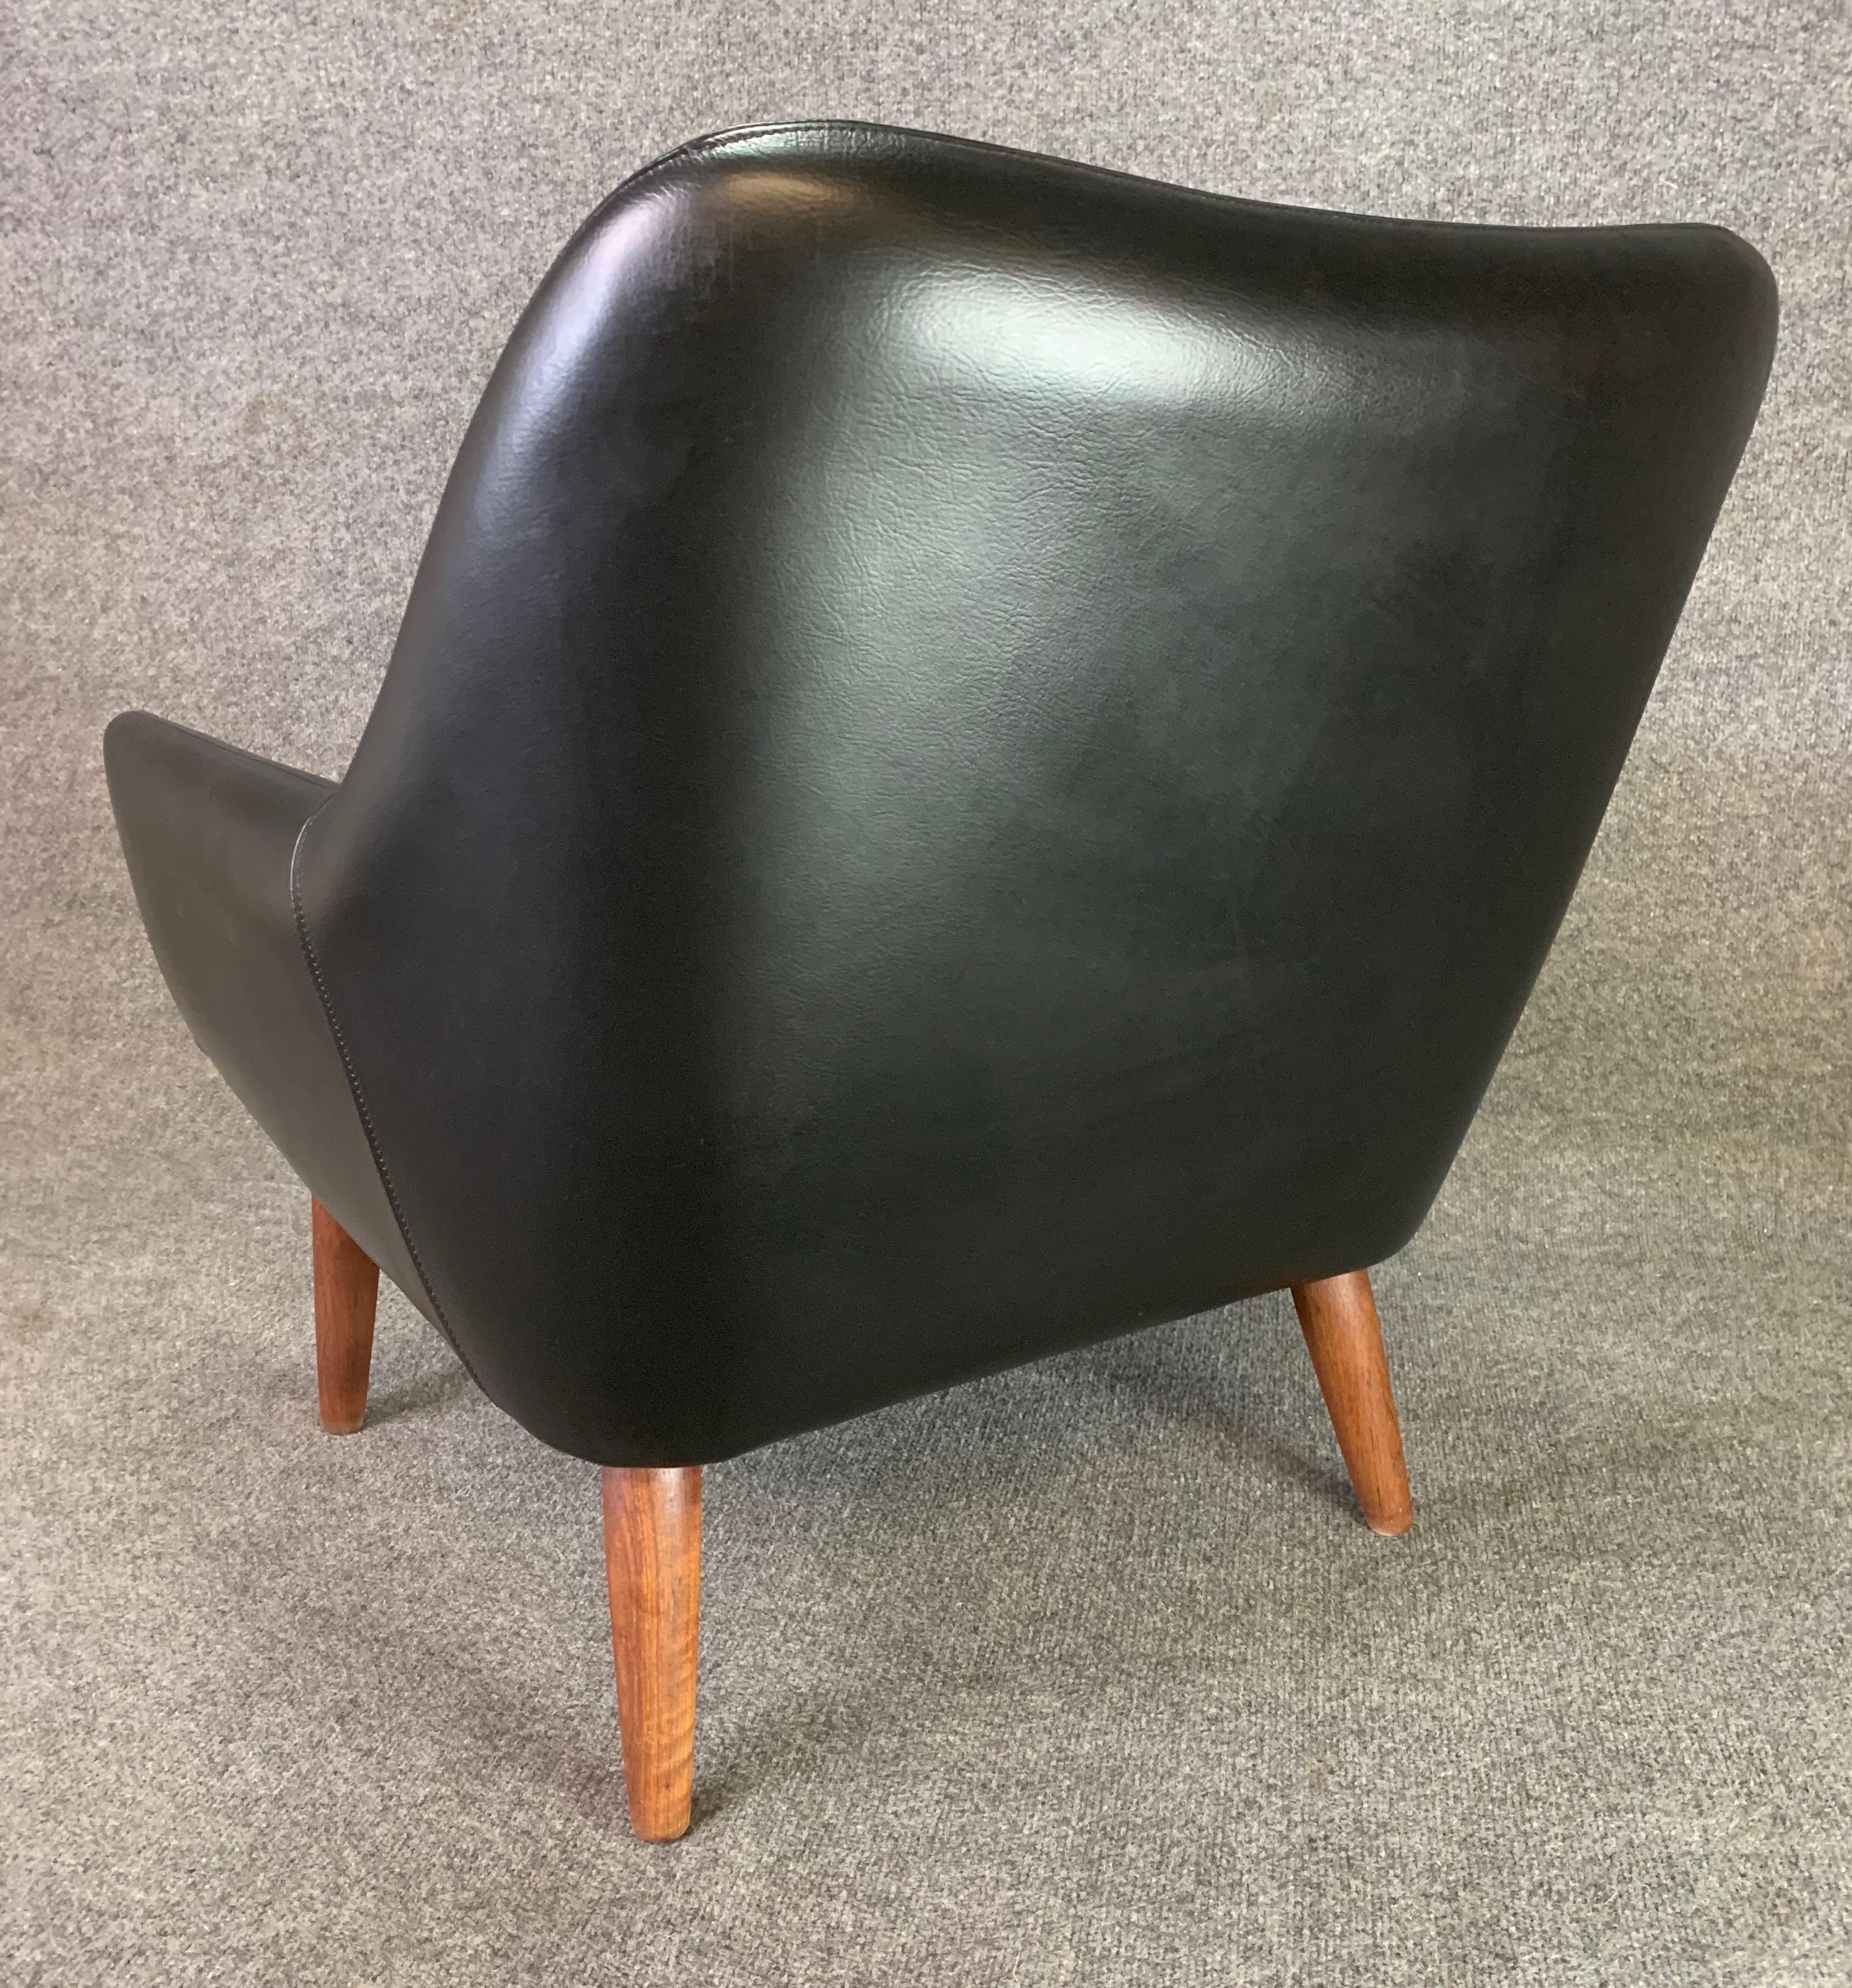 Vintage Danish Mid-Century Modern Leather and Teak Lounge Chair For Sale 3